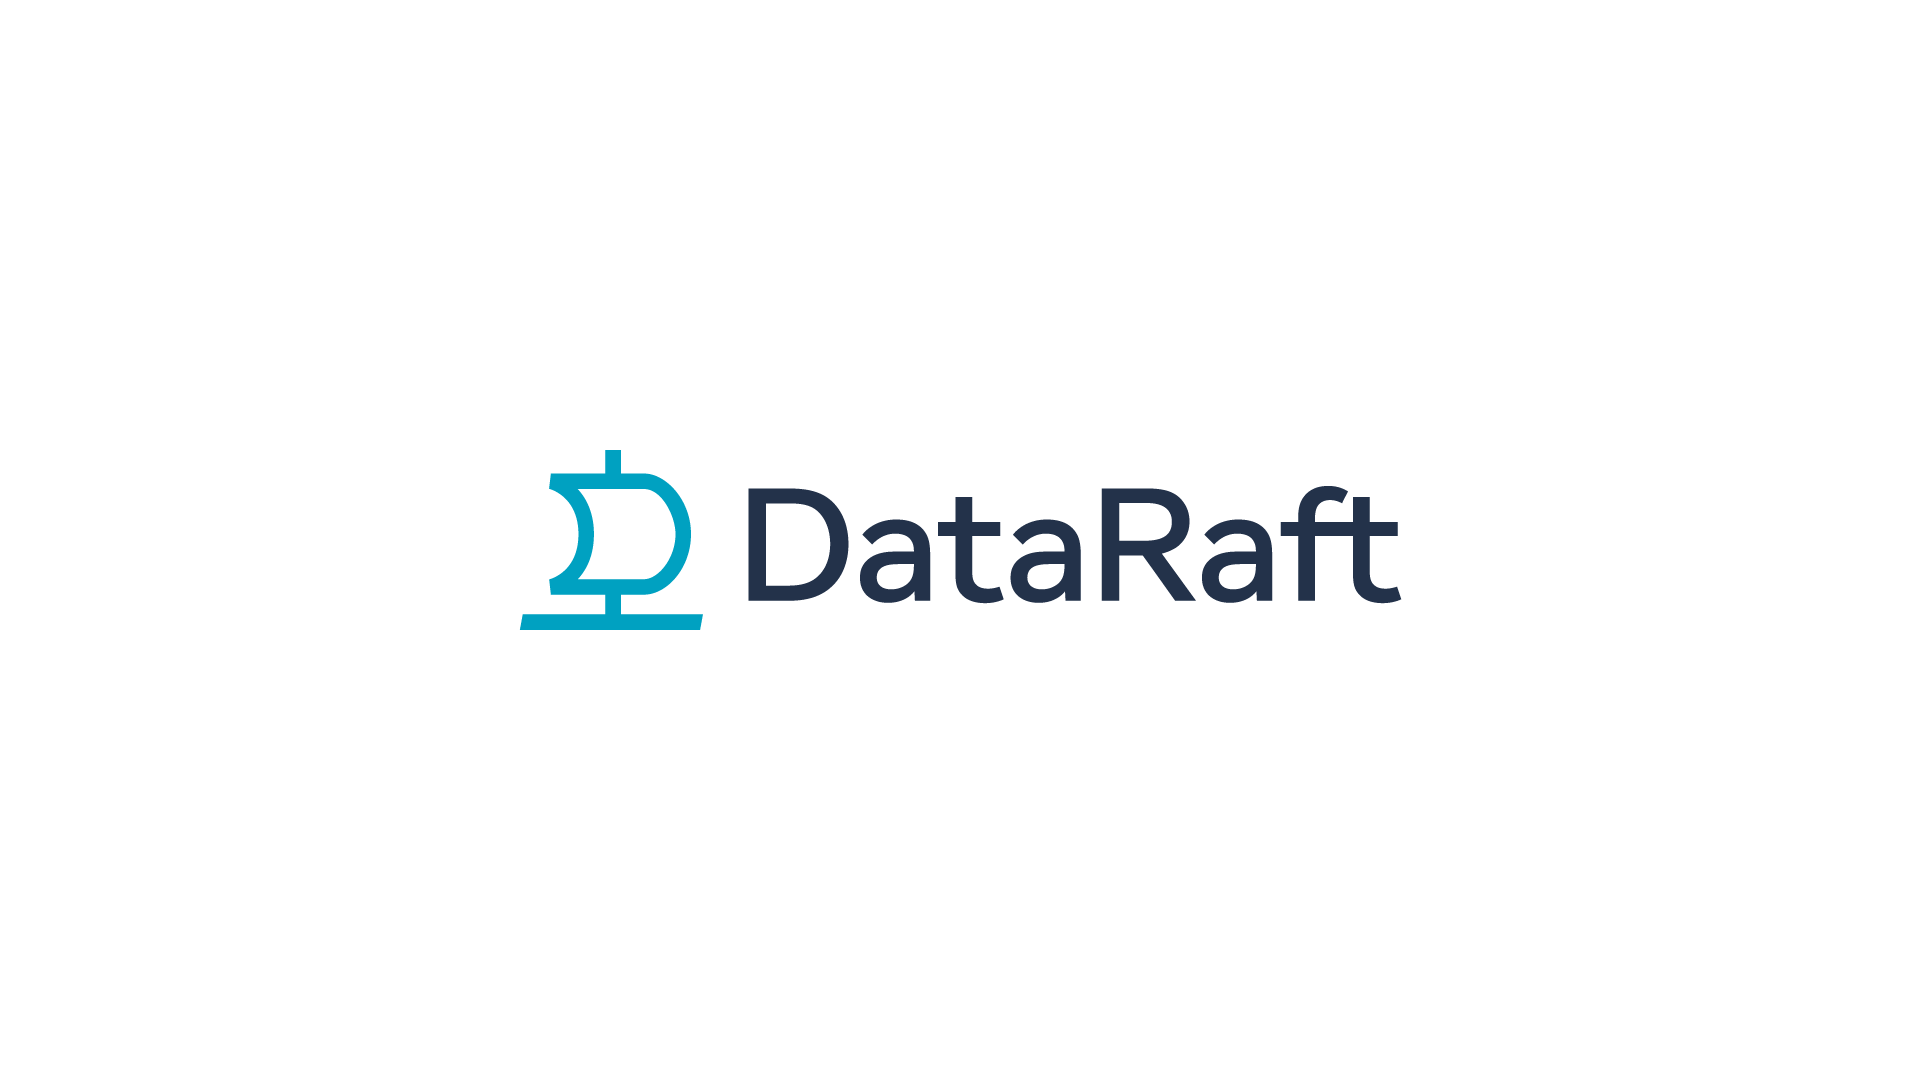 DataRaft logo with a raft and the letter 'D', representing seamless data operations and navigation